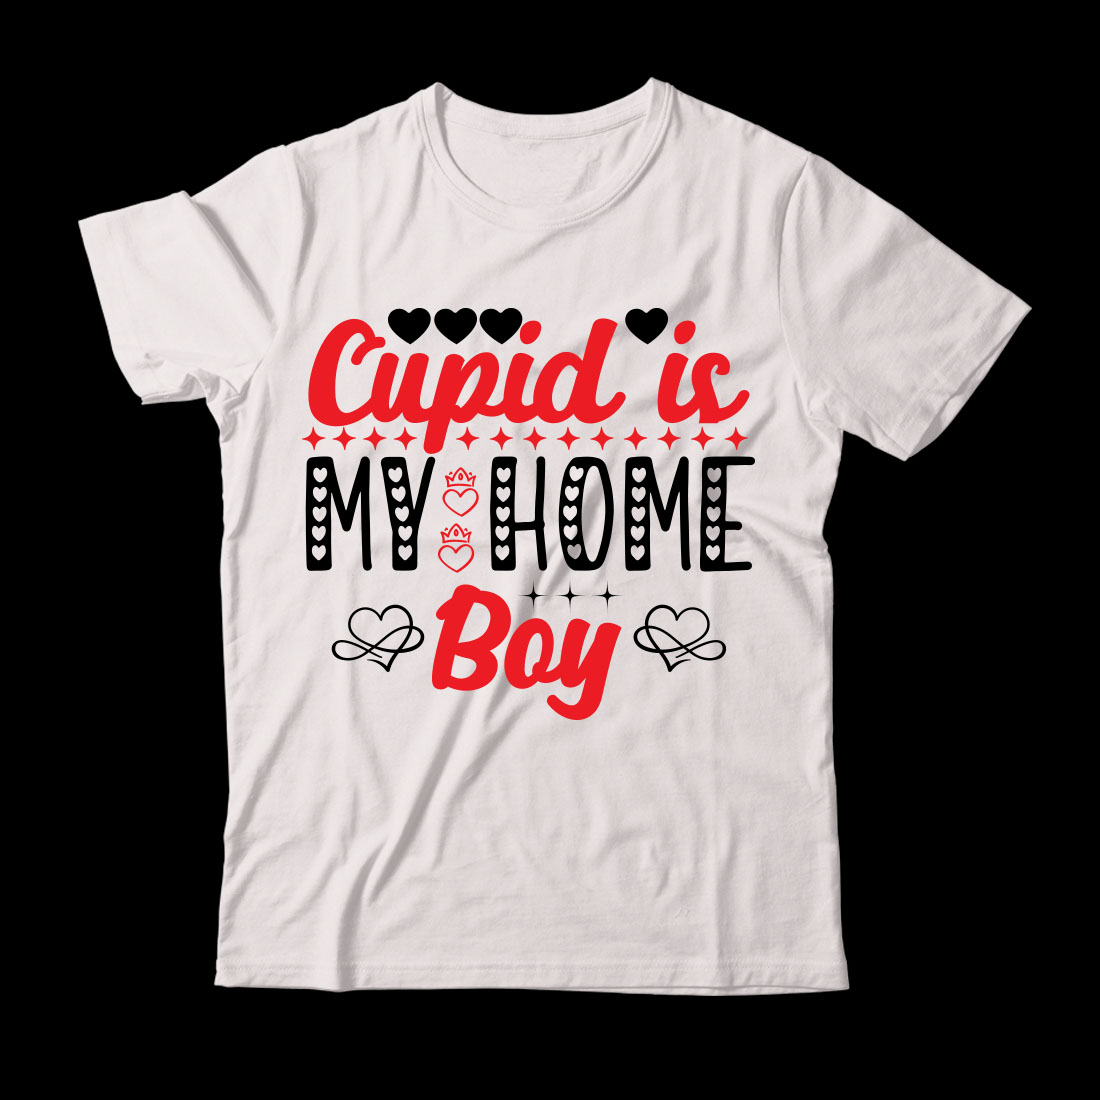 White shirt that says cupid is my home boy.